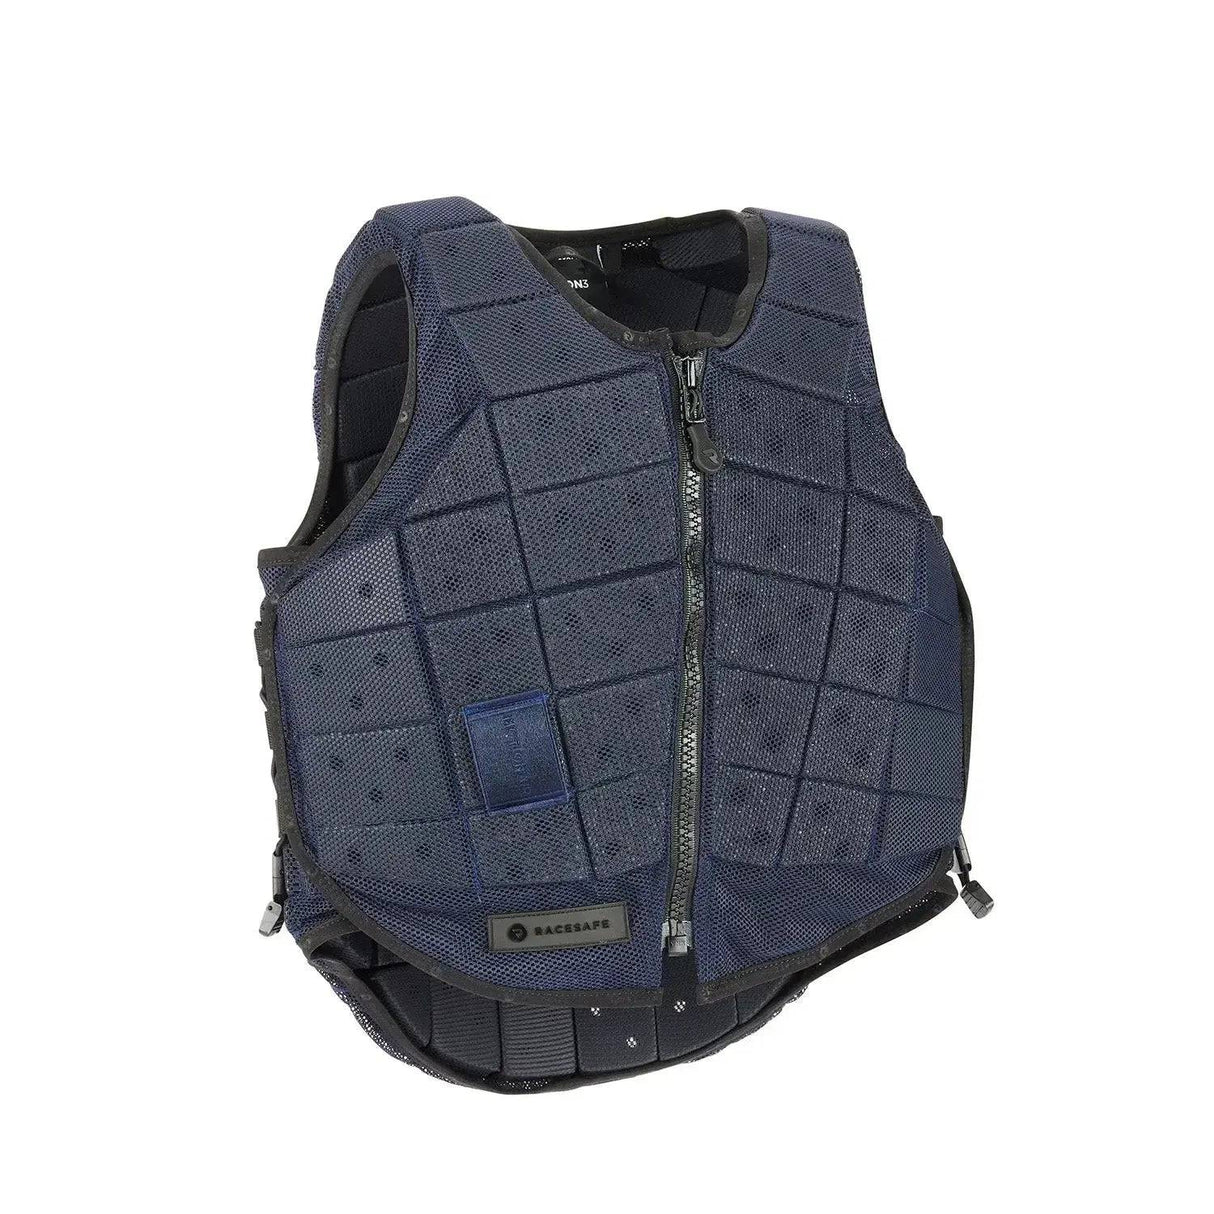 Racesafe Motion 3 Young Body Protector Young X Small Short Racesafe Body Protectors Barnstaple Equestrian Supplies